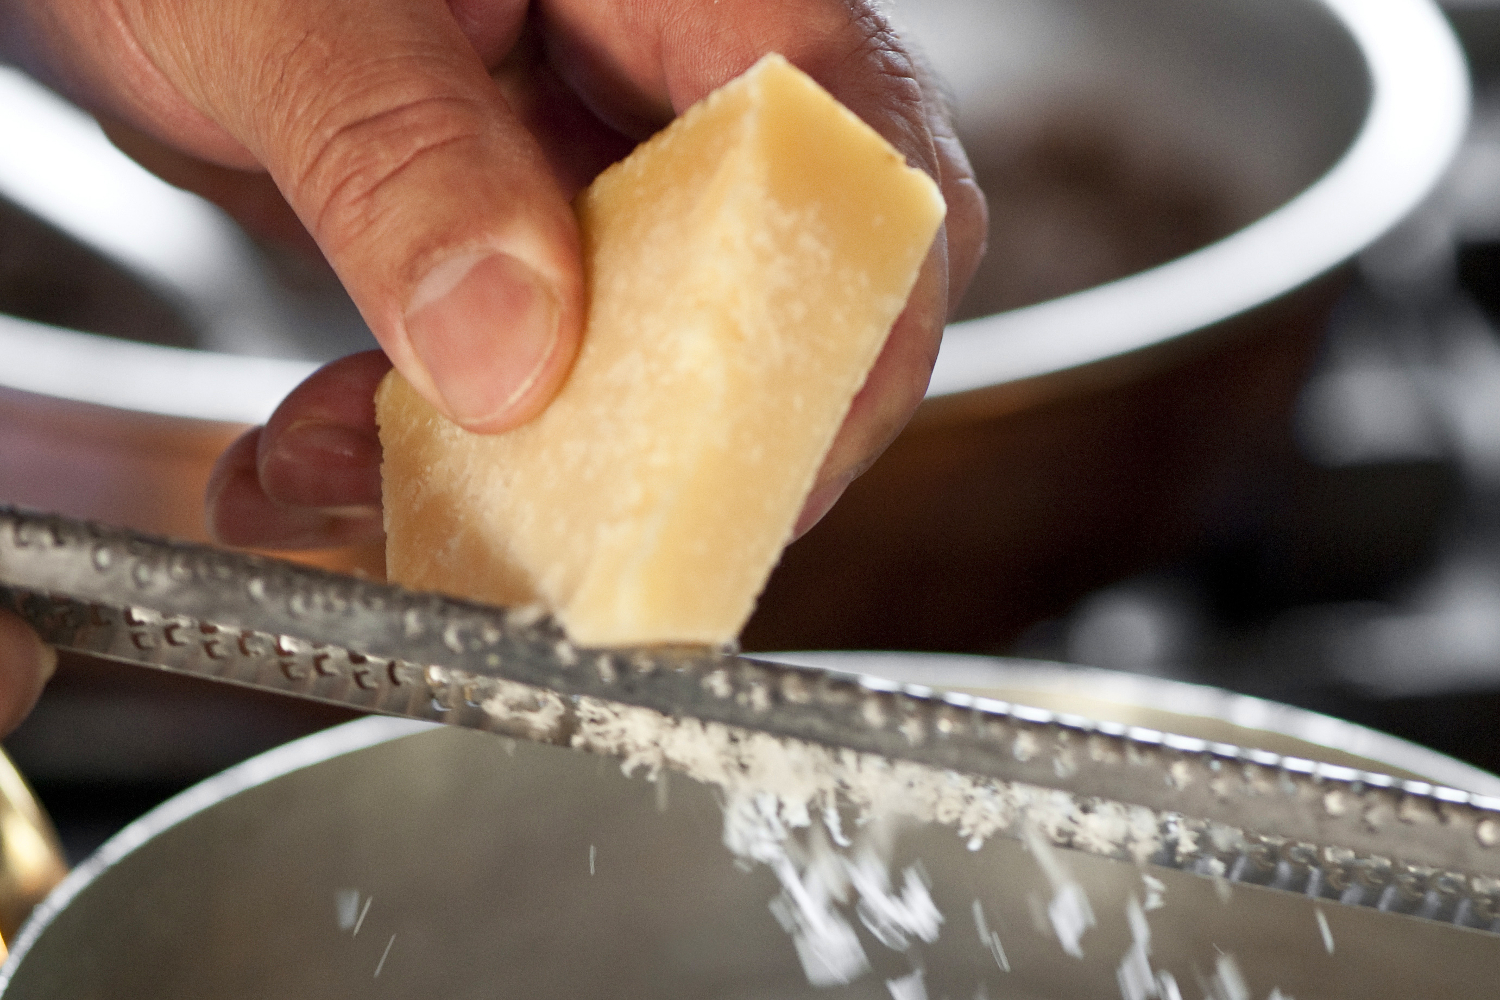 Grated parmesan is used in many Italian dishes